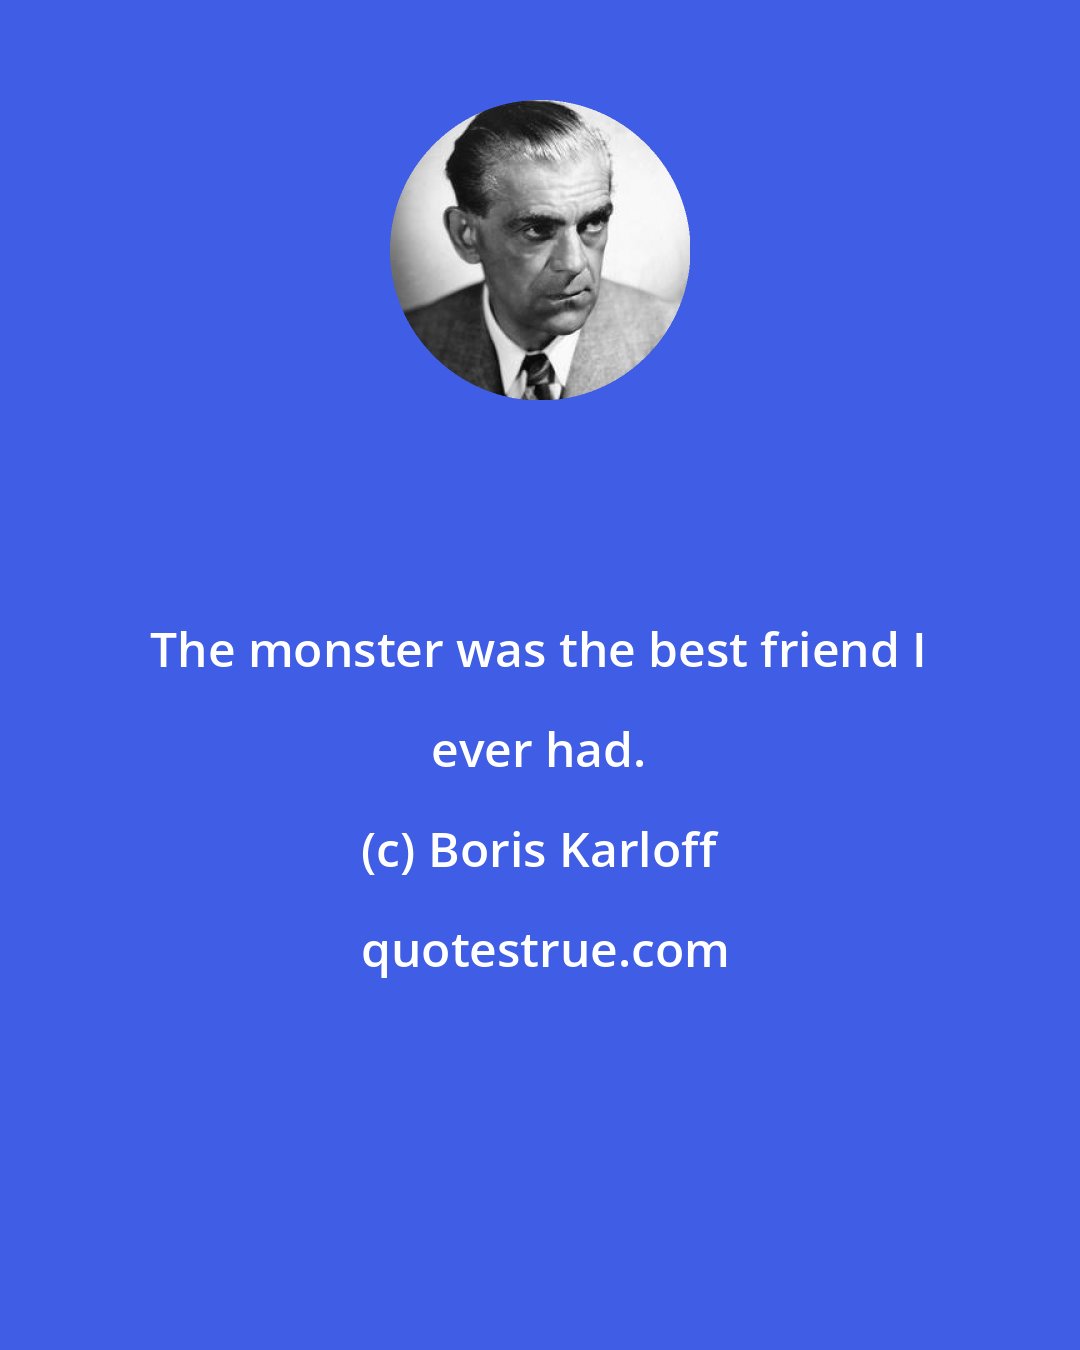 Boris Karloff: The monster was the best friend I ever had.